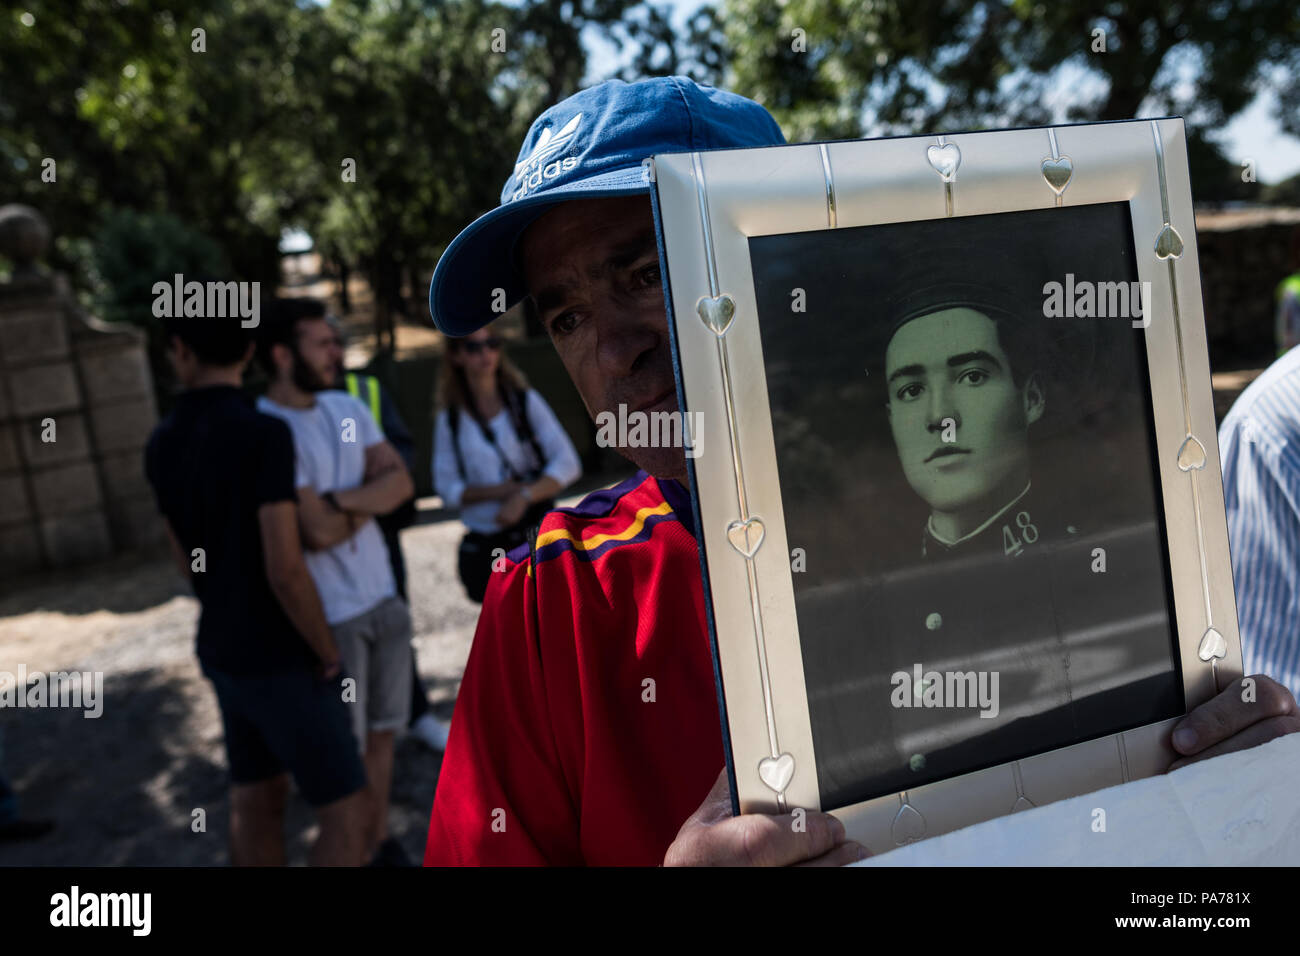 San Lorenzo del Escorial, Madrid, Spain. 21st July 2018. A man shows a picture of his grandfather who was killed by Franco's army in Malaga during the Spanish civil war, during a protest at the entrance of 'Valle de los Caidos' (Valley of the Fallen) monument to demand the removal of Franco and Primo de Rivera's remains, in San Lorenzo del Escorial, Madrid, Spain. Credit: Marcos del Mazo/Almy Live News Stock Photo